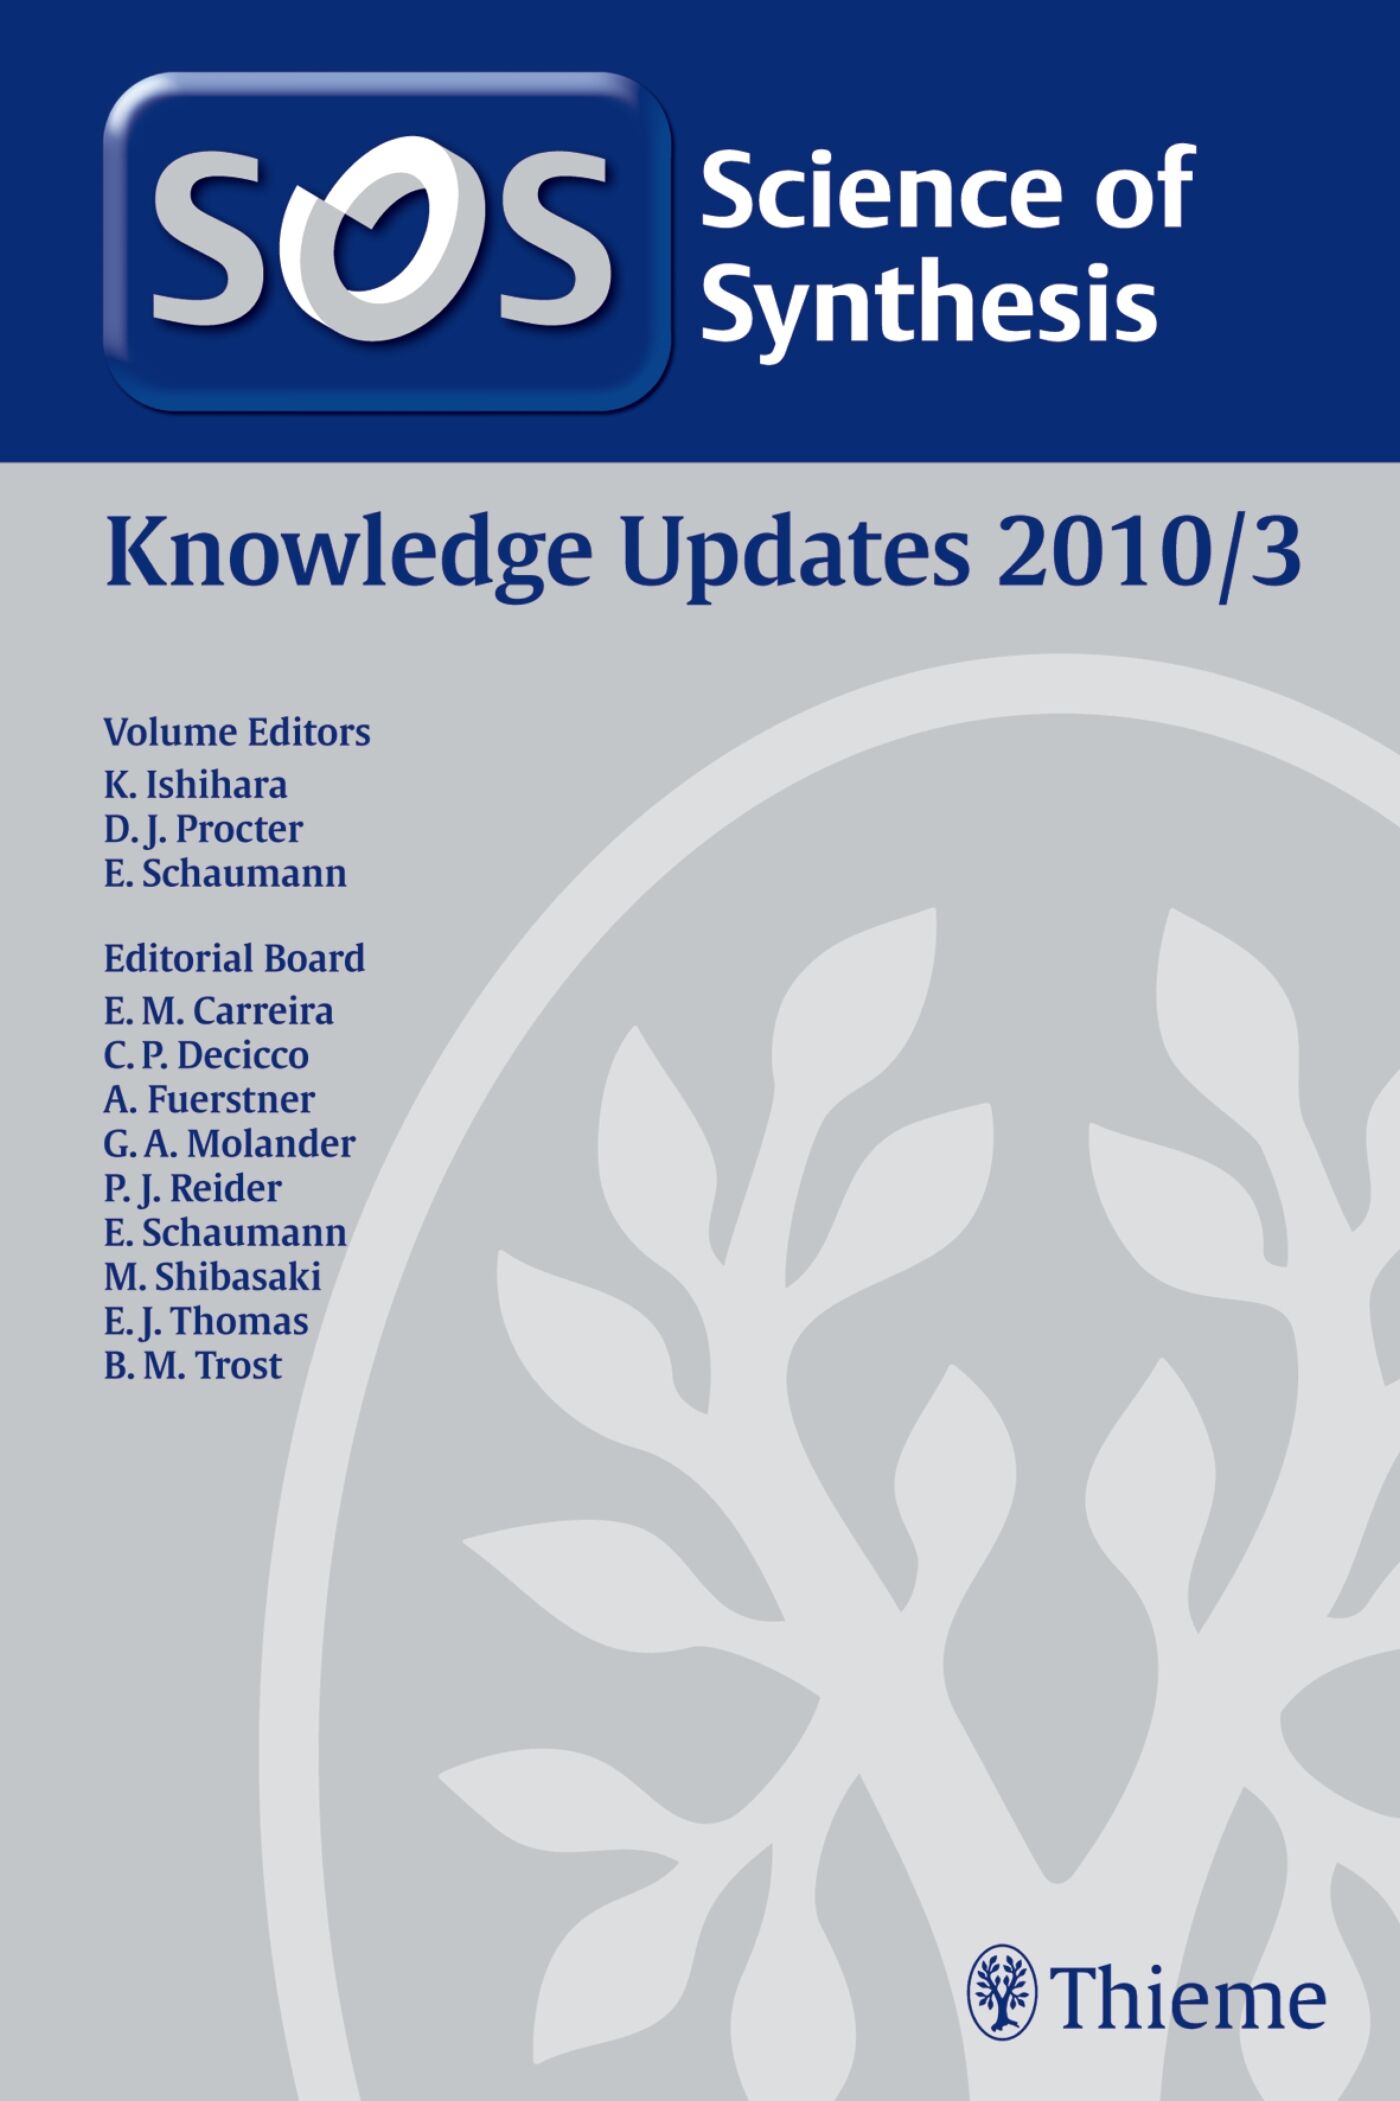 Science of Synthesis Knowledge Updates 2010 Vol. 3, 9783131541611